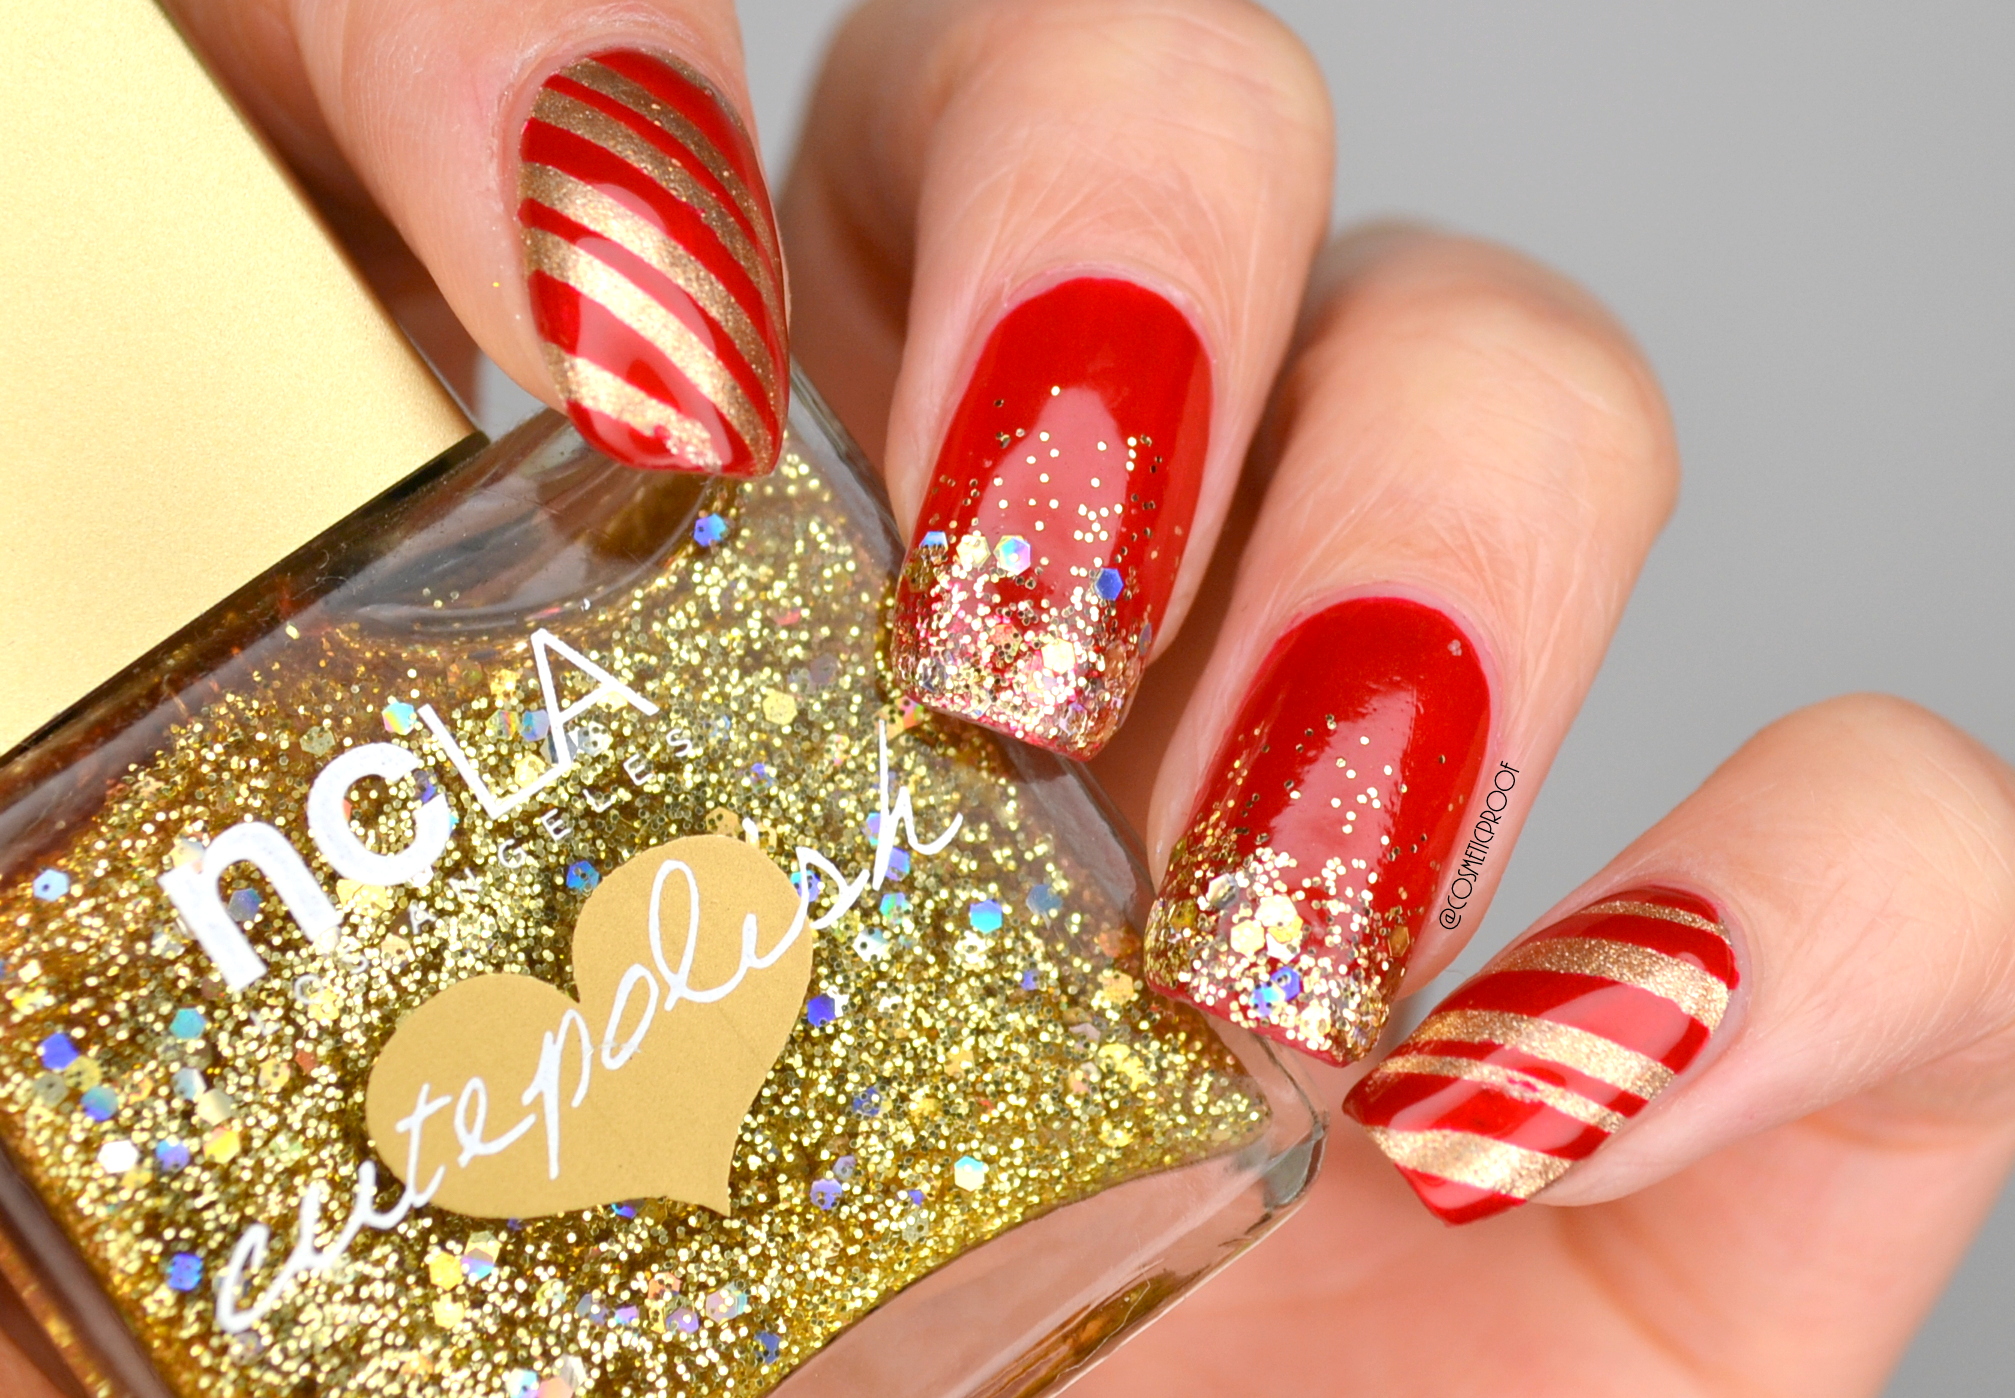 8. "Festive Toe Nail Colors for New Year's" - wide 1